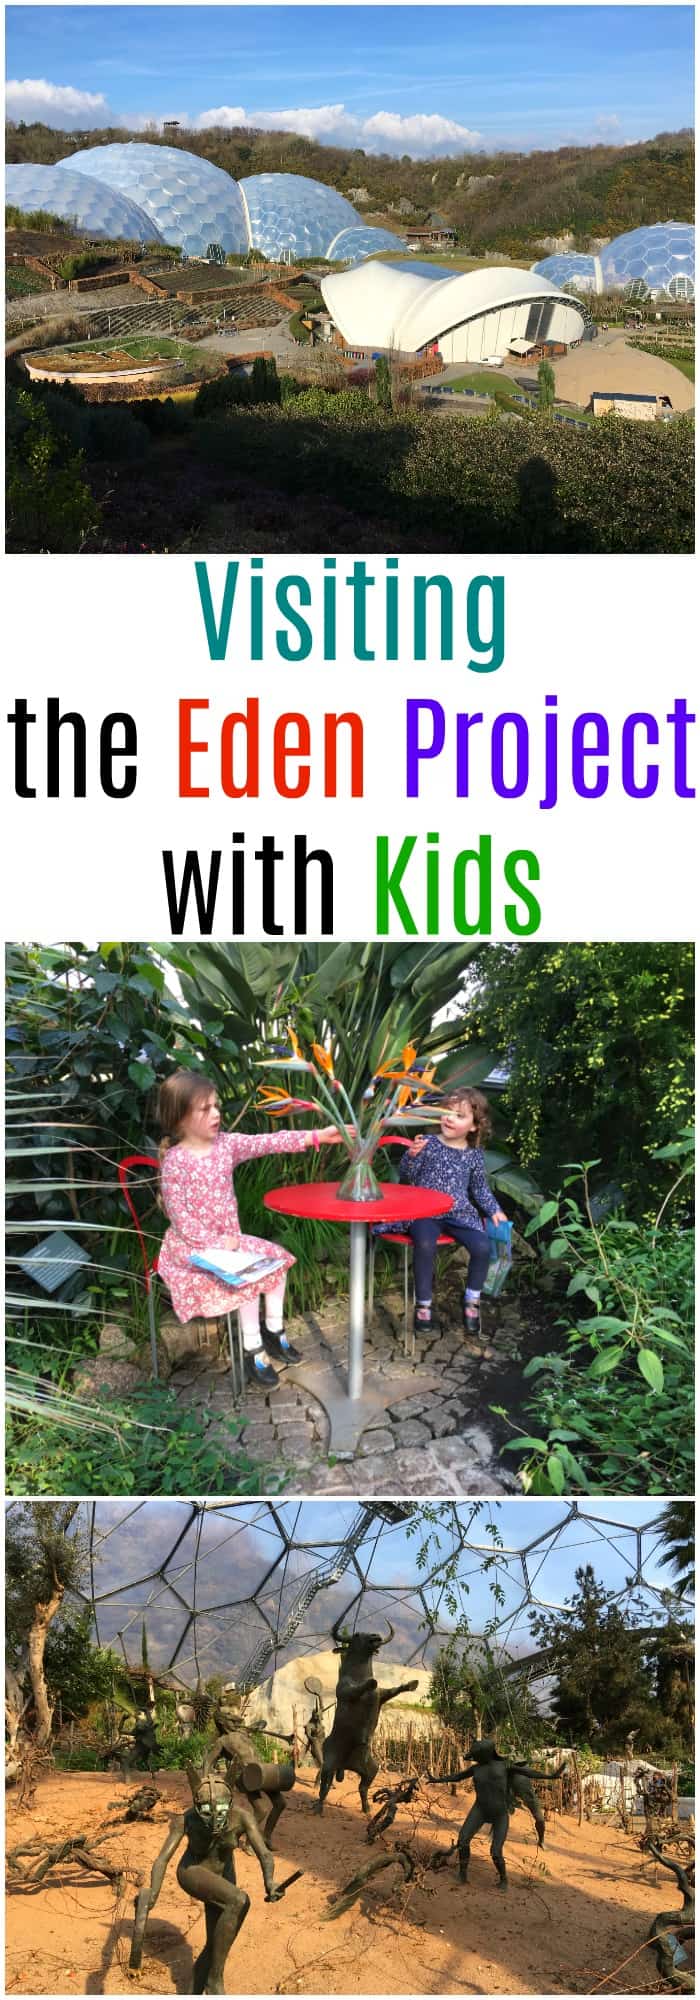 Looking for days out in Cornwall? Read our review of visiting the Eden project in Cornwall with kids Perfect for planning your next UK holiday 